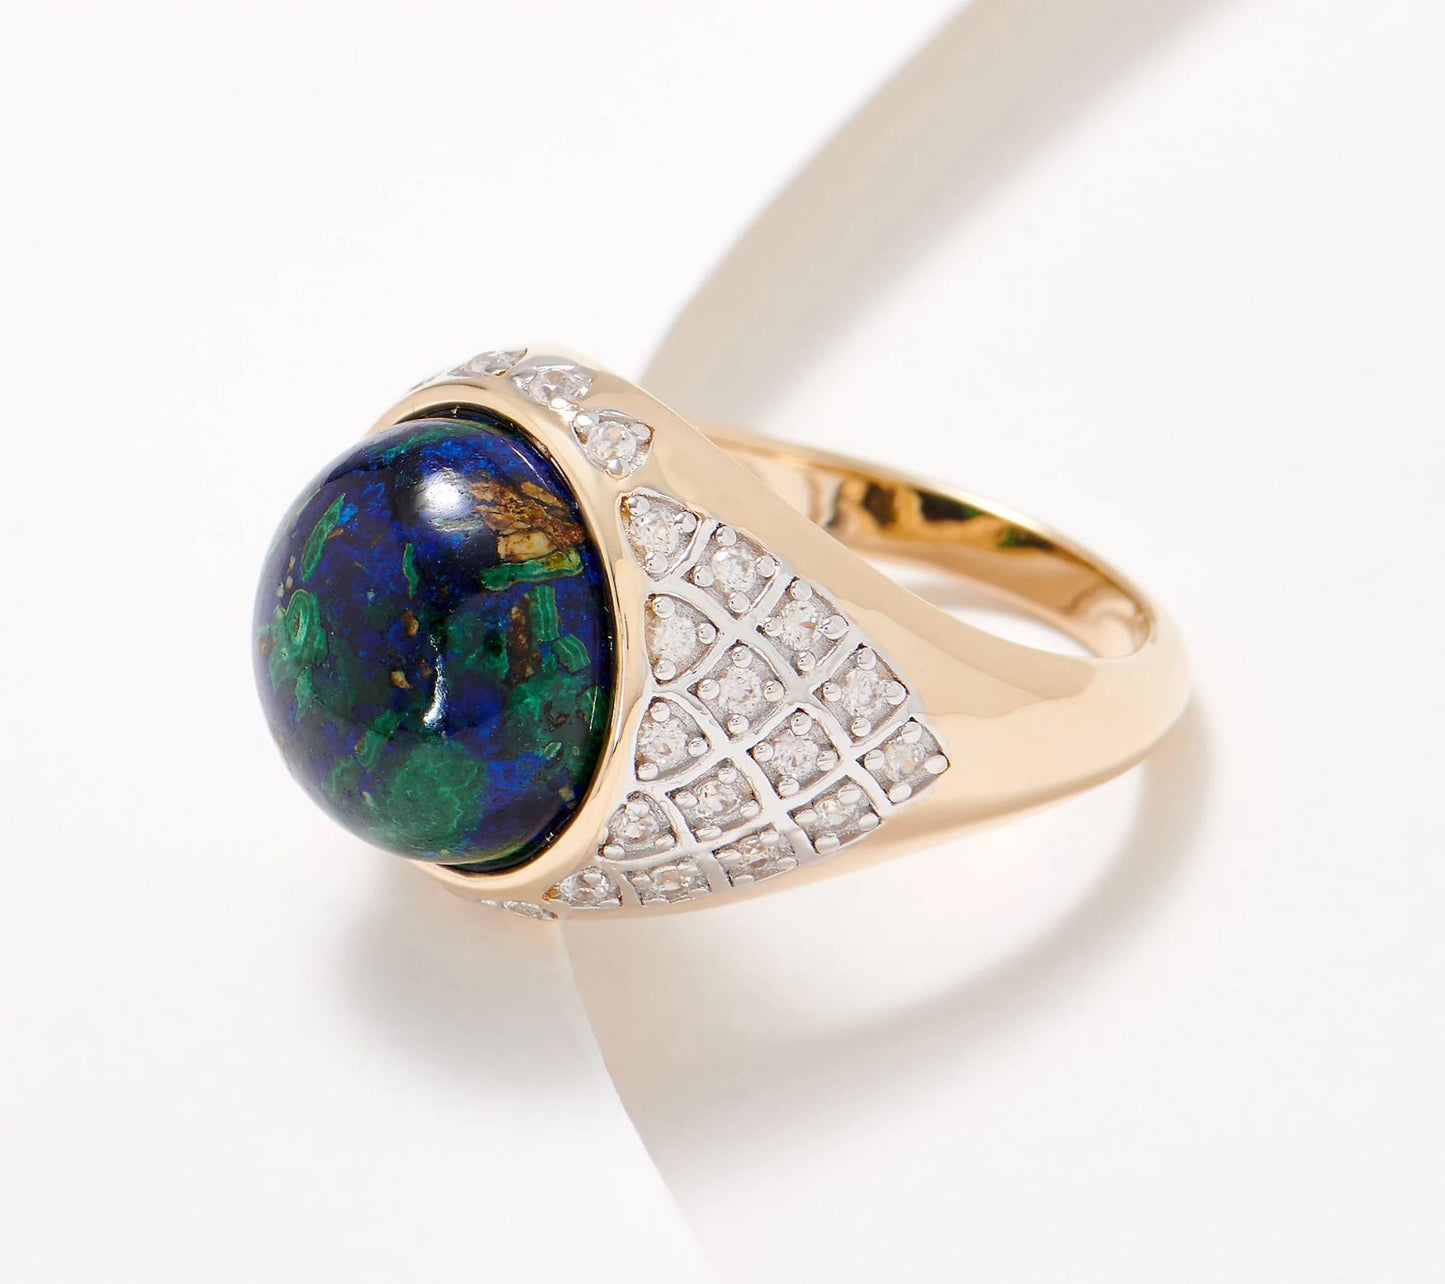 Generation Gems  Azurite & White Zircon Ring, 14K gold-plated sterling. Size 8